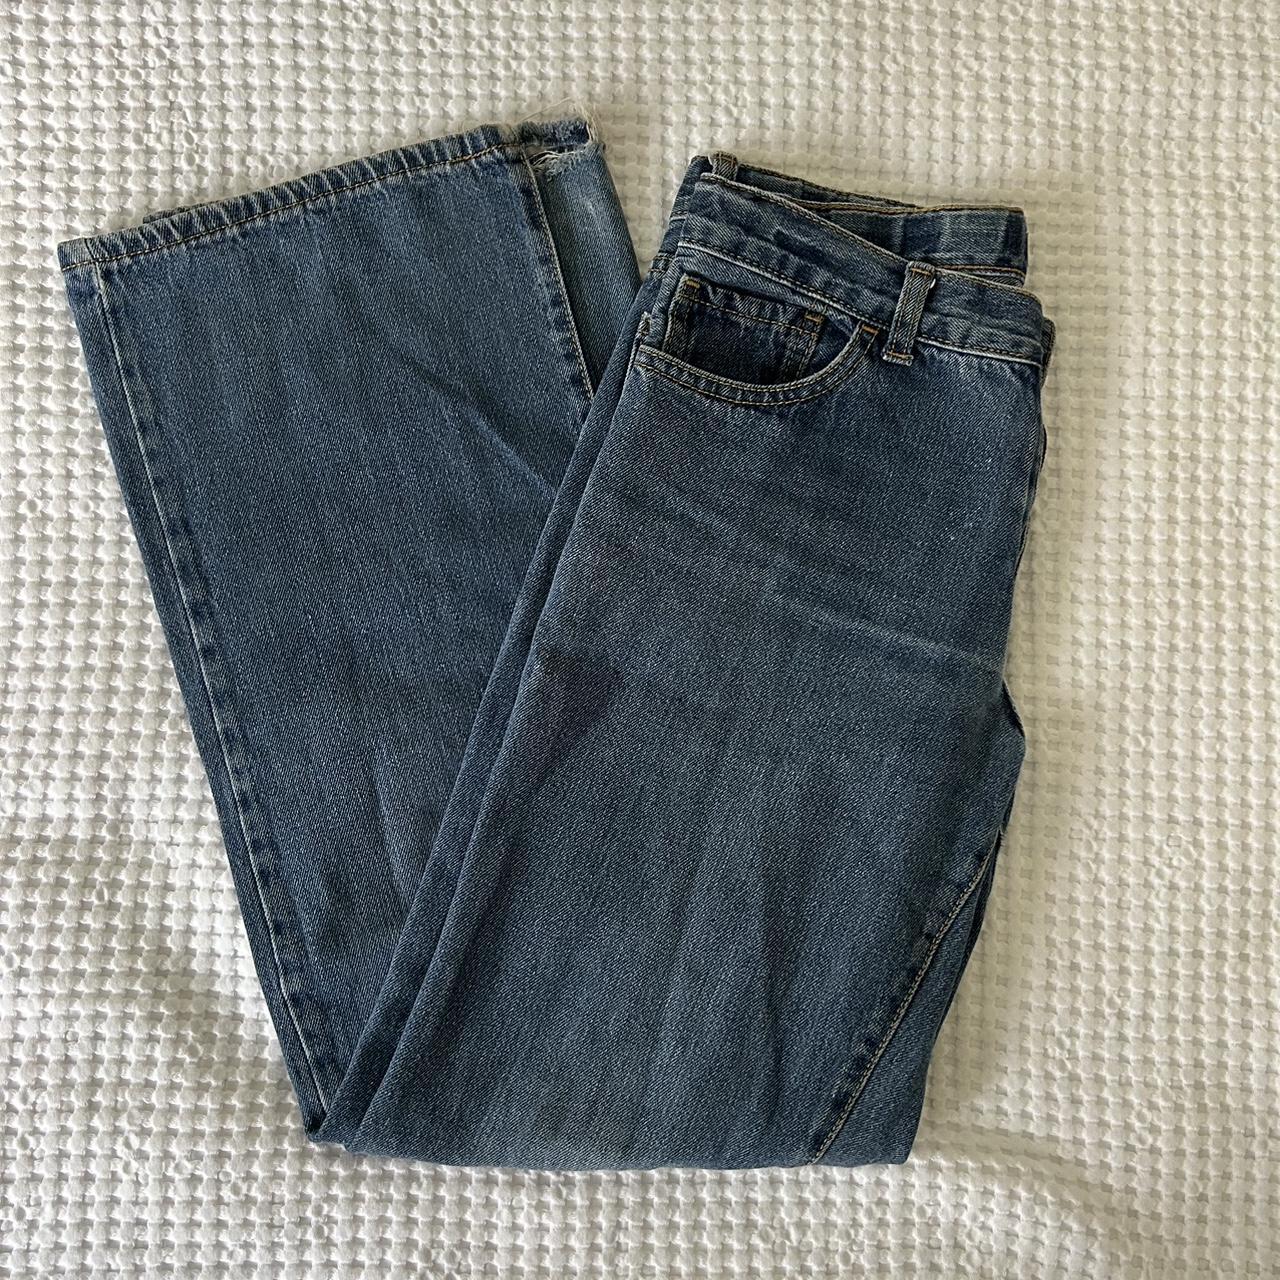 CIRCO JEANS, comfy and easy to wear. - Depop